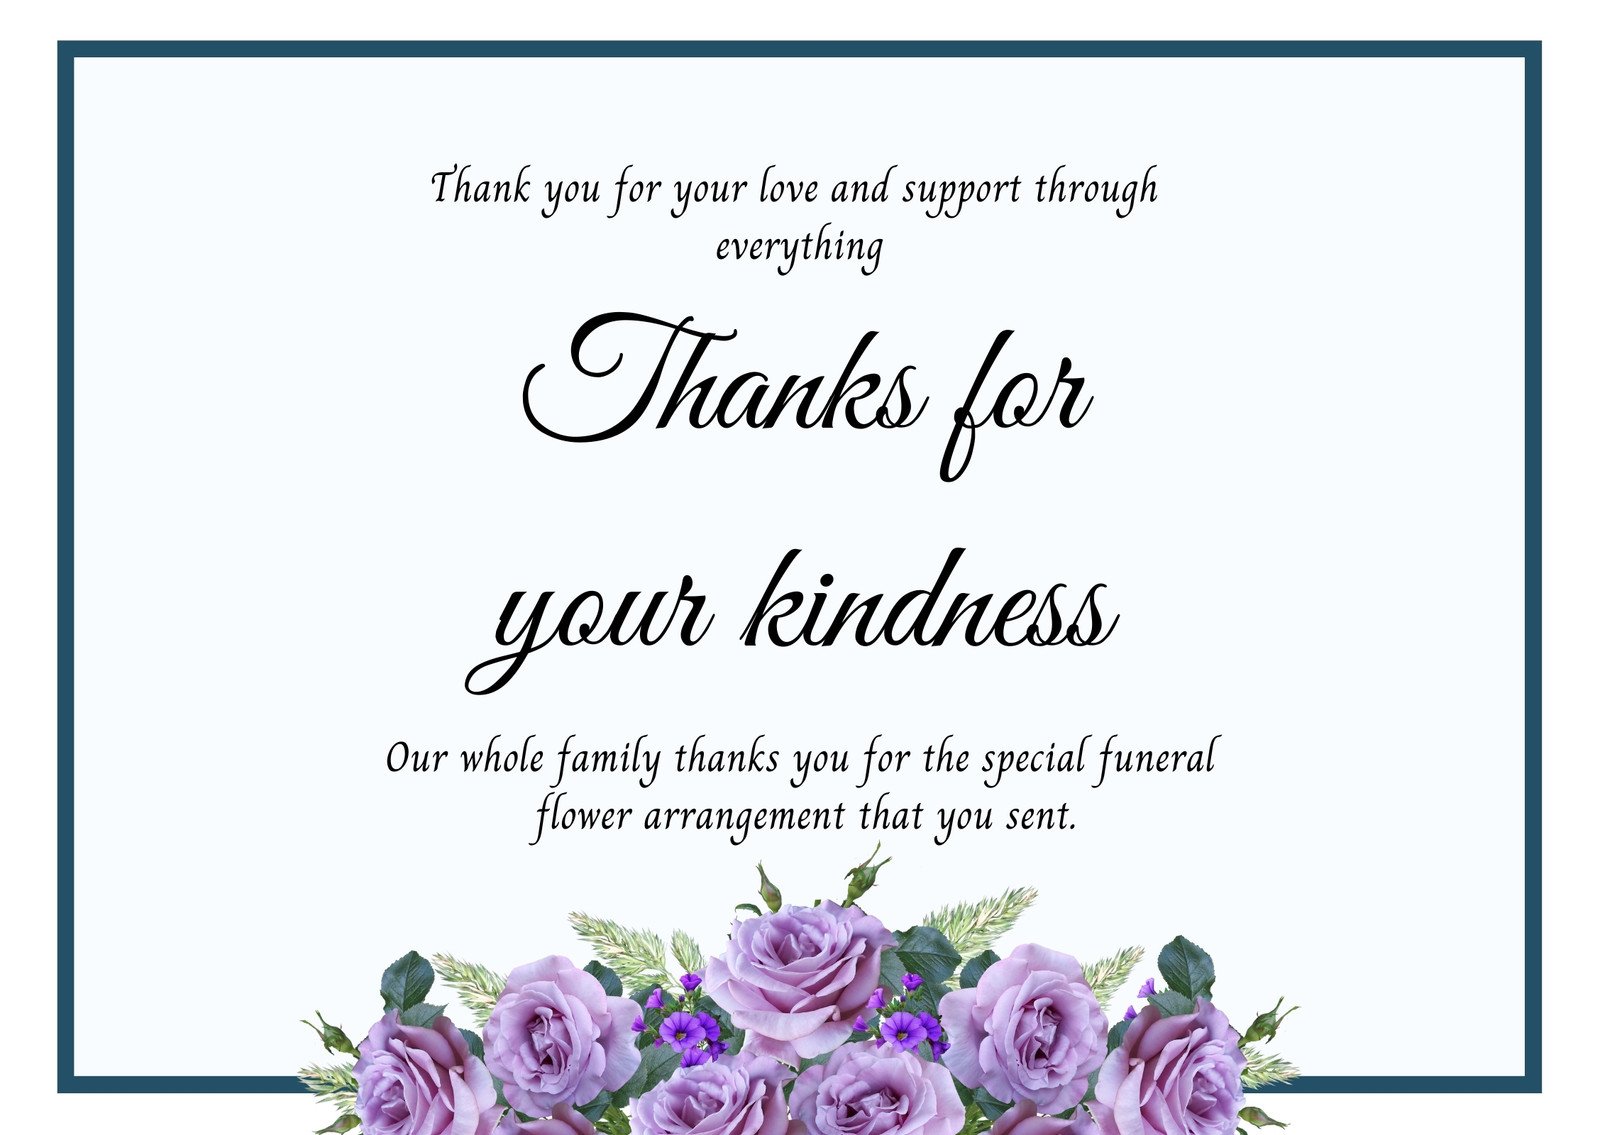 Custom Funeral Thank You Card designed with your personal message